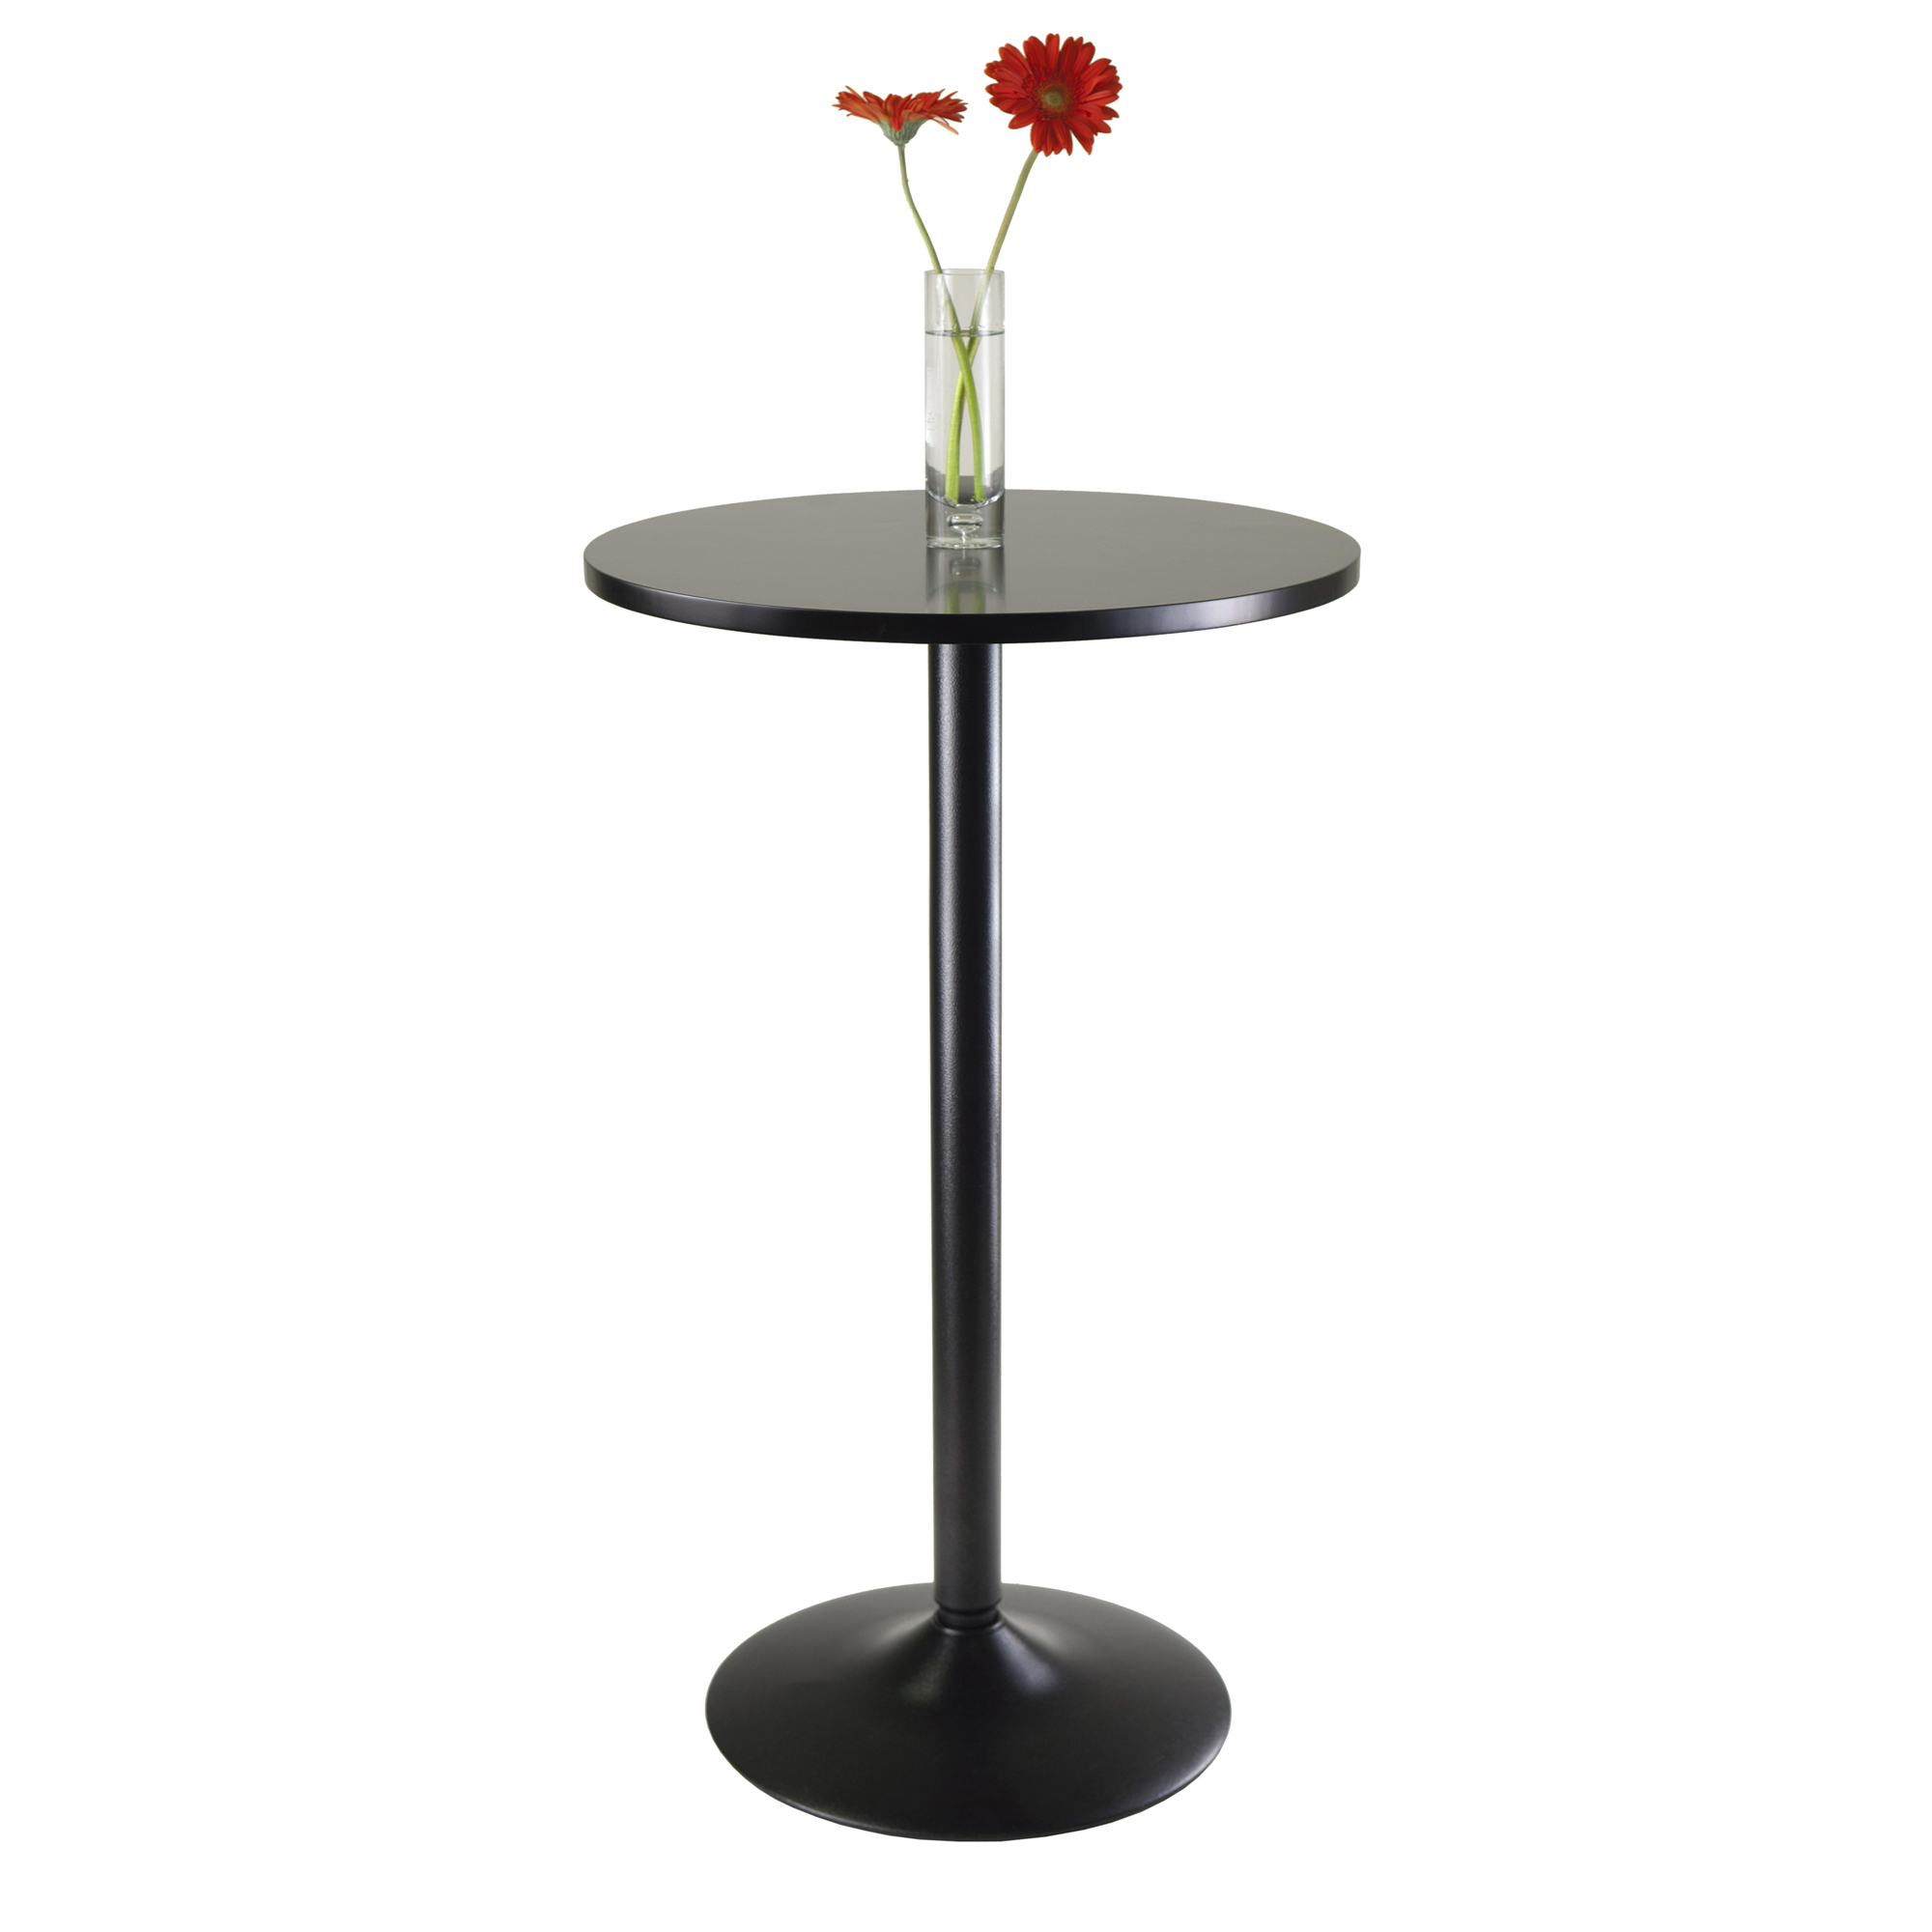 Winsome Obsidian Round Pub Table with MDF Wood Top, Legs, and Base, Black - image 2 of 7